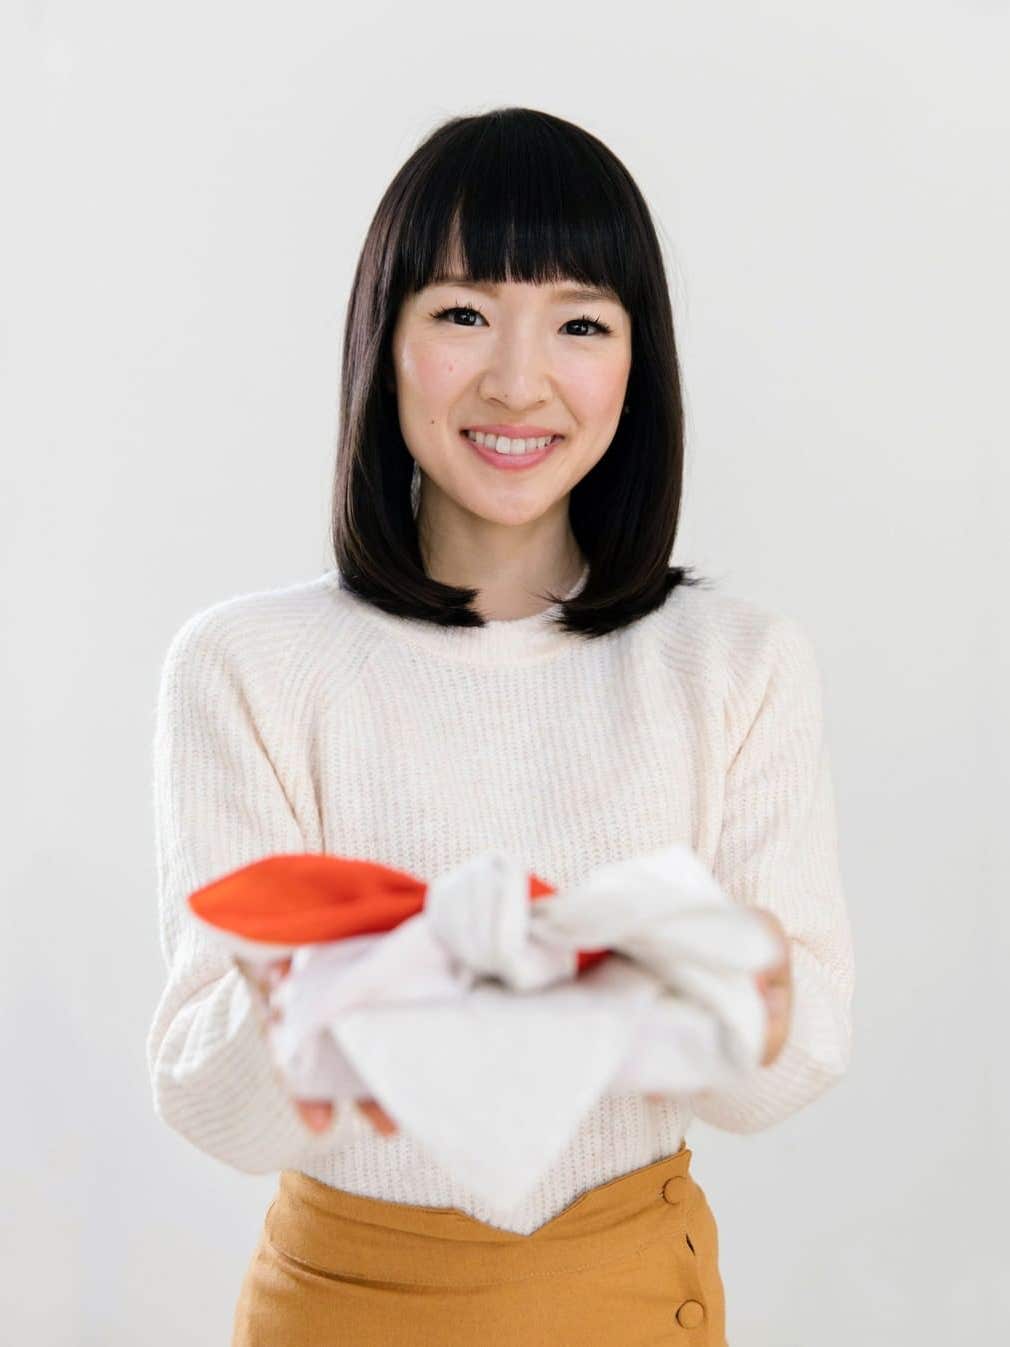 Marie Kondo Asked Fans “What’s the Oddest Item You’ve Folded?” and Their Answers Are Great